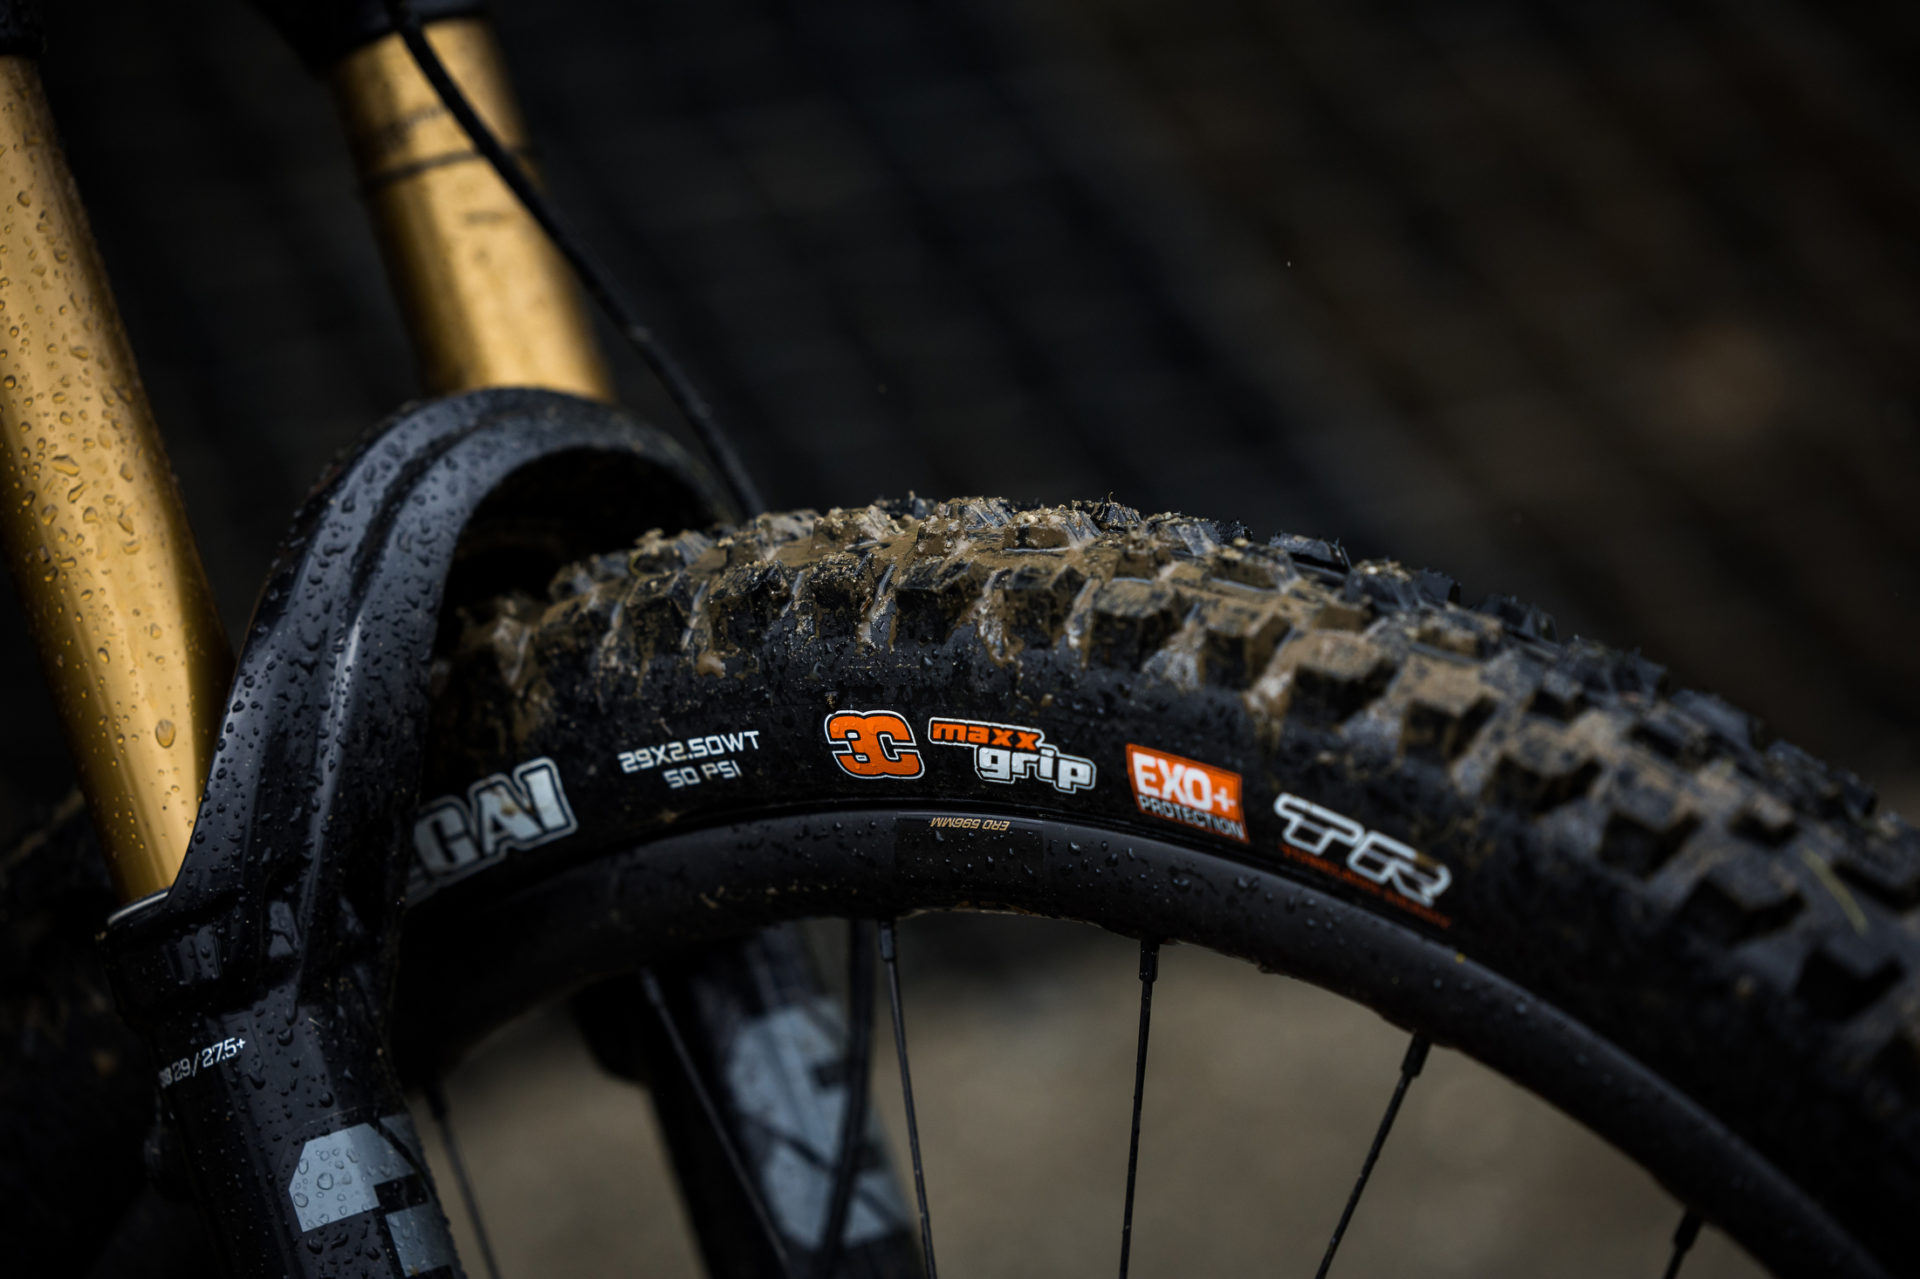 Close up of a Maxxis bicycle tire